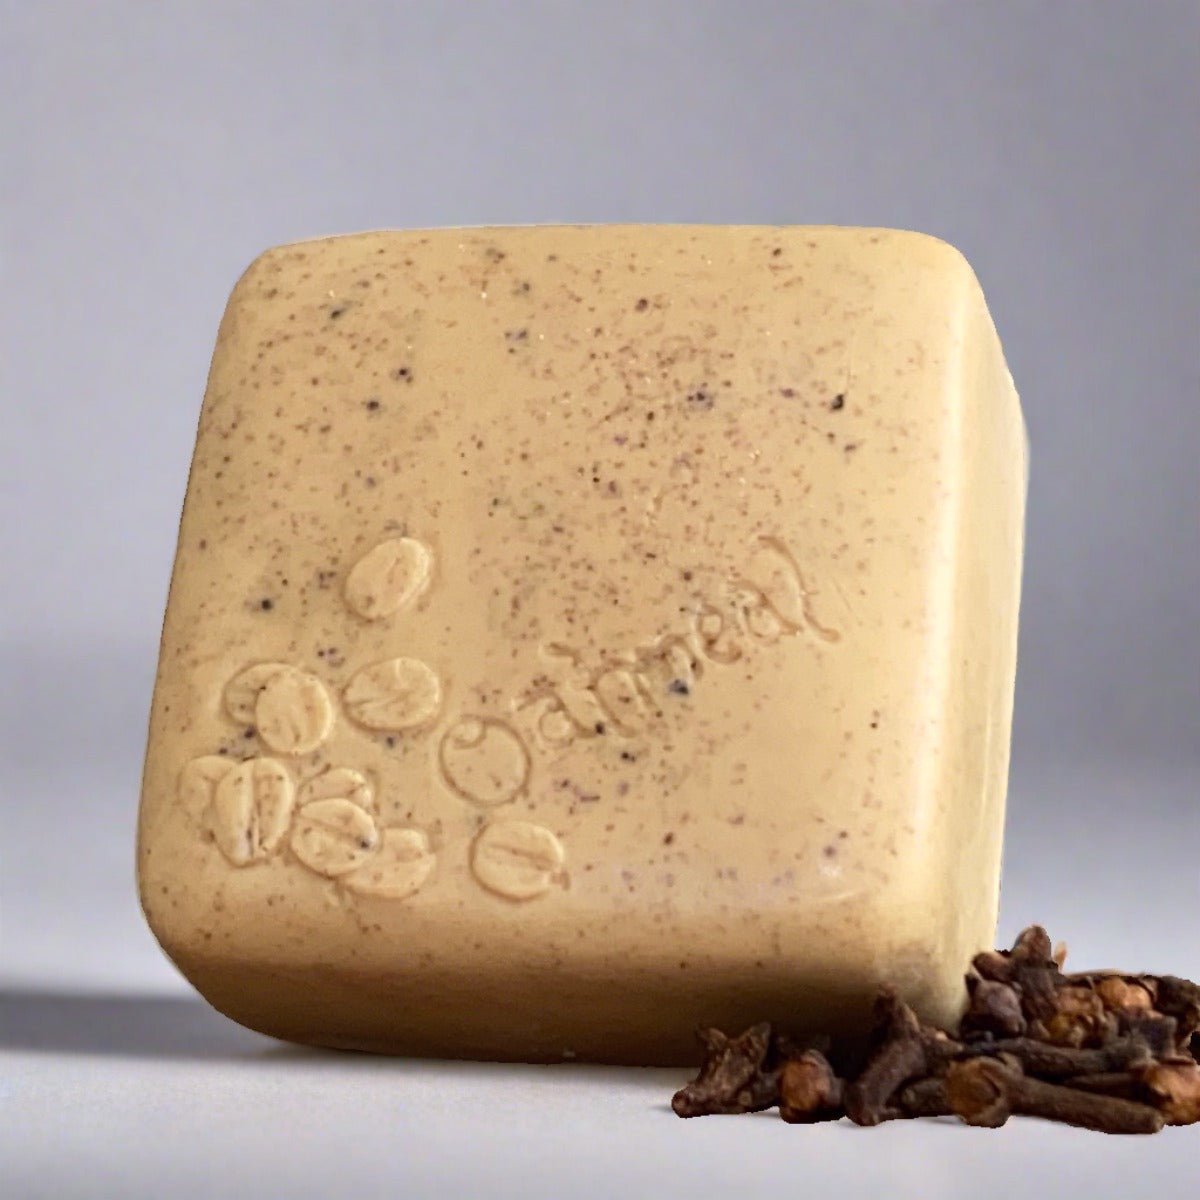 Oatmeal and Clove Soap  specially formulated to help heal sensitive, irritated skin